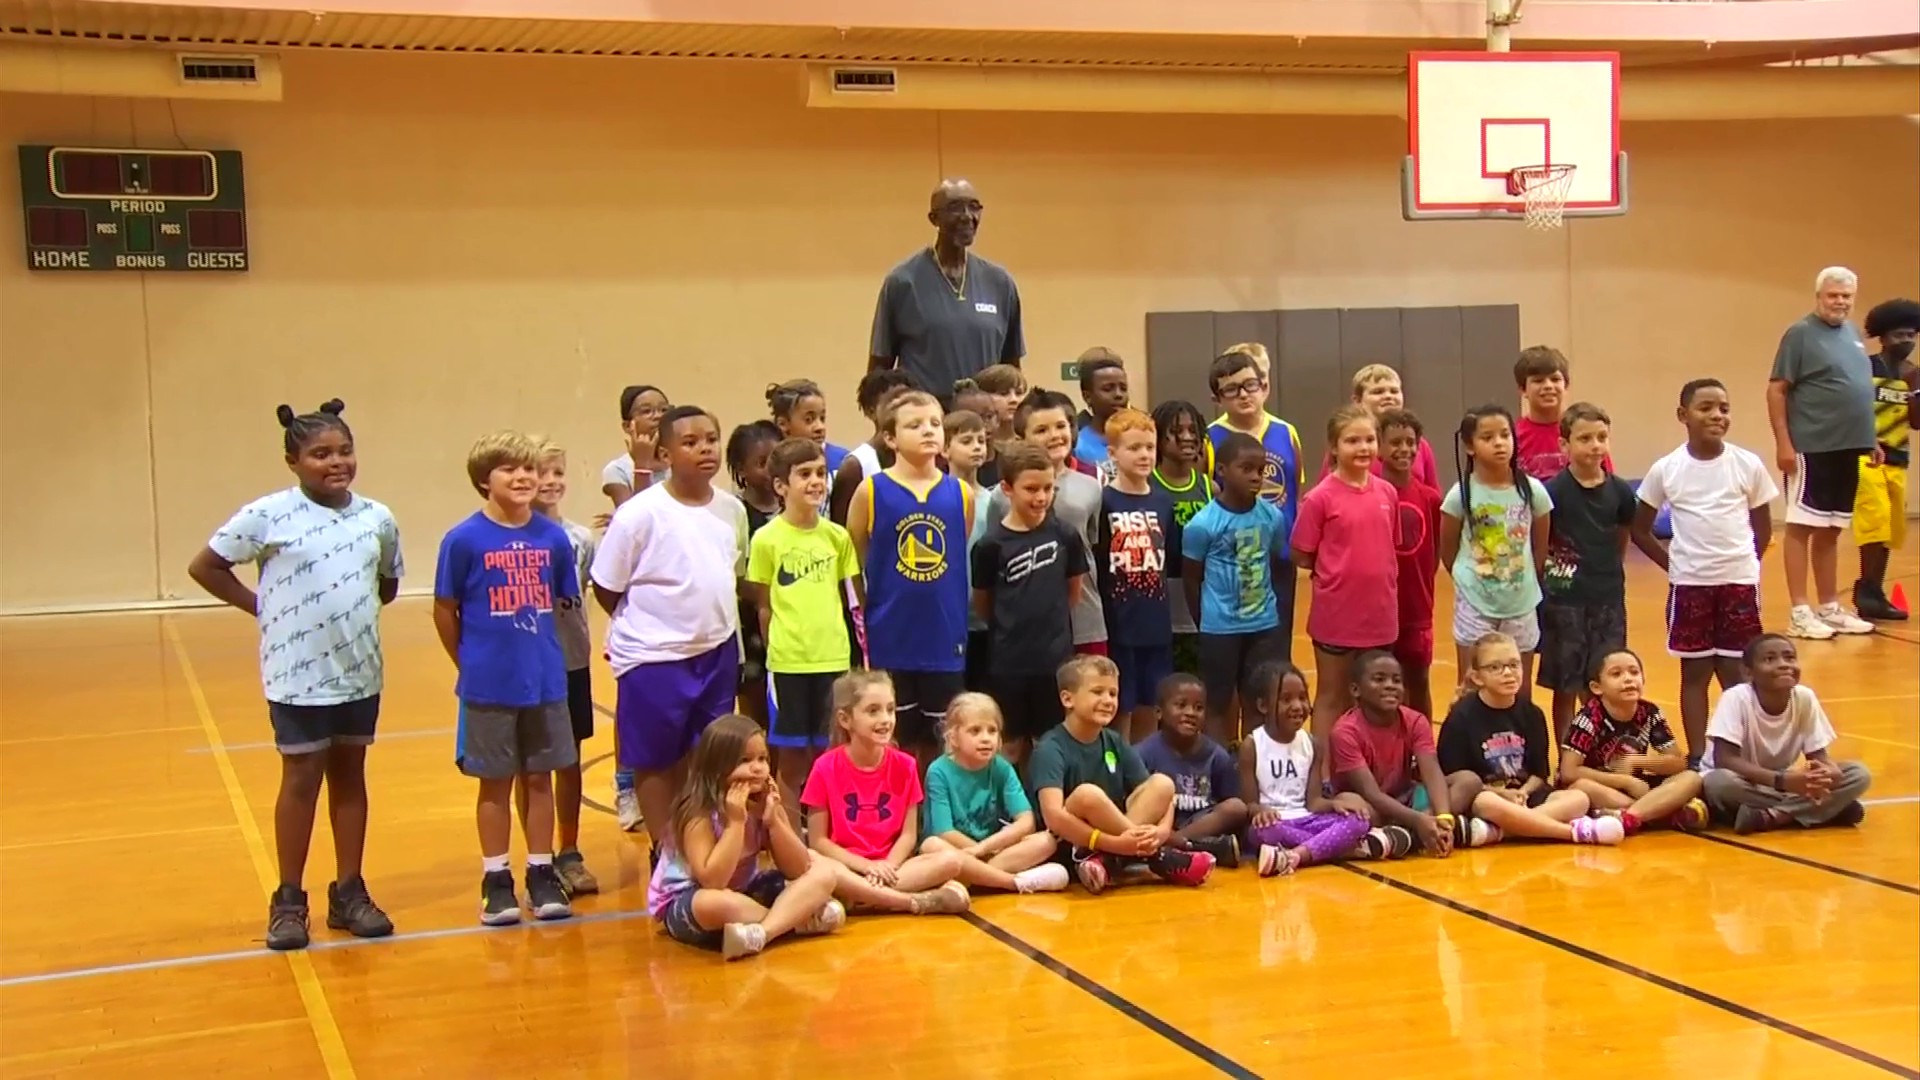 Local basketball clinic brings former Globetrotter to Martinsville